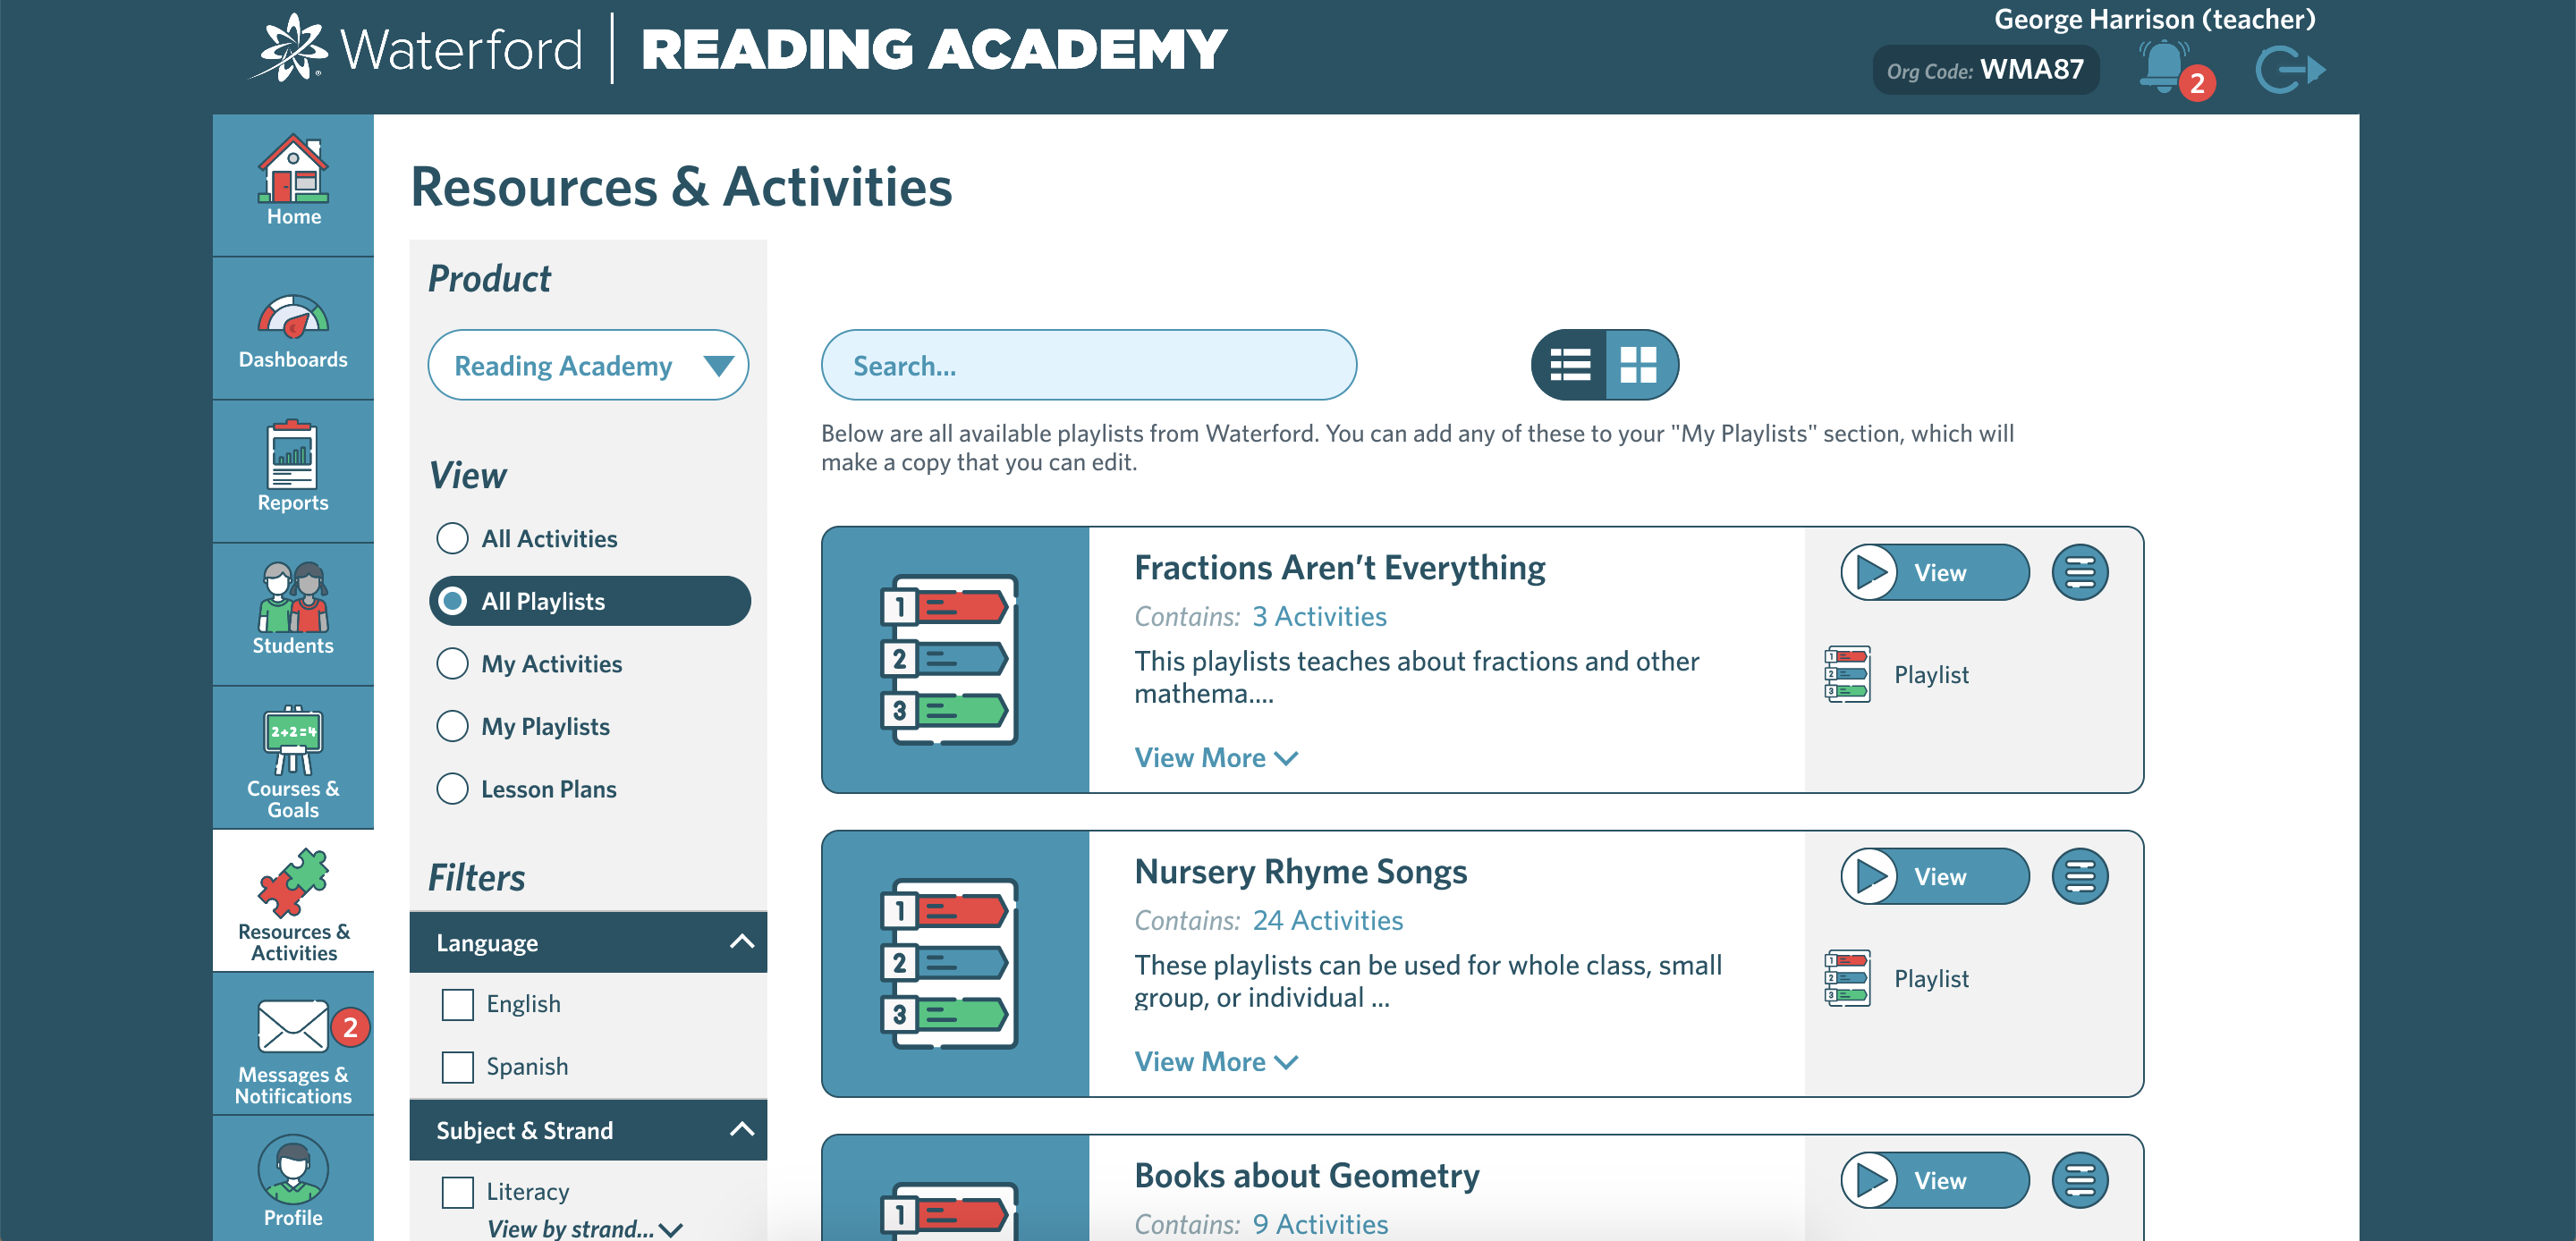 screenshot of the Playlists section of the Resources & Activities page